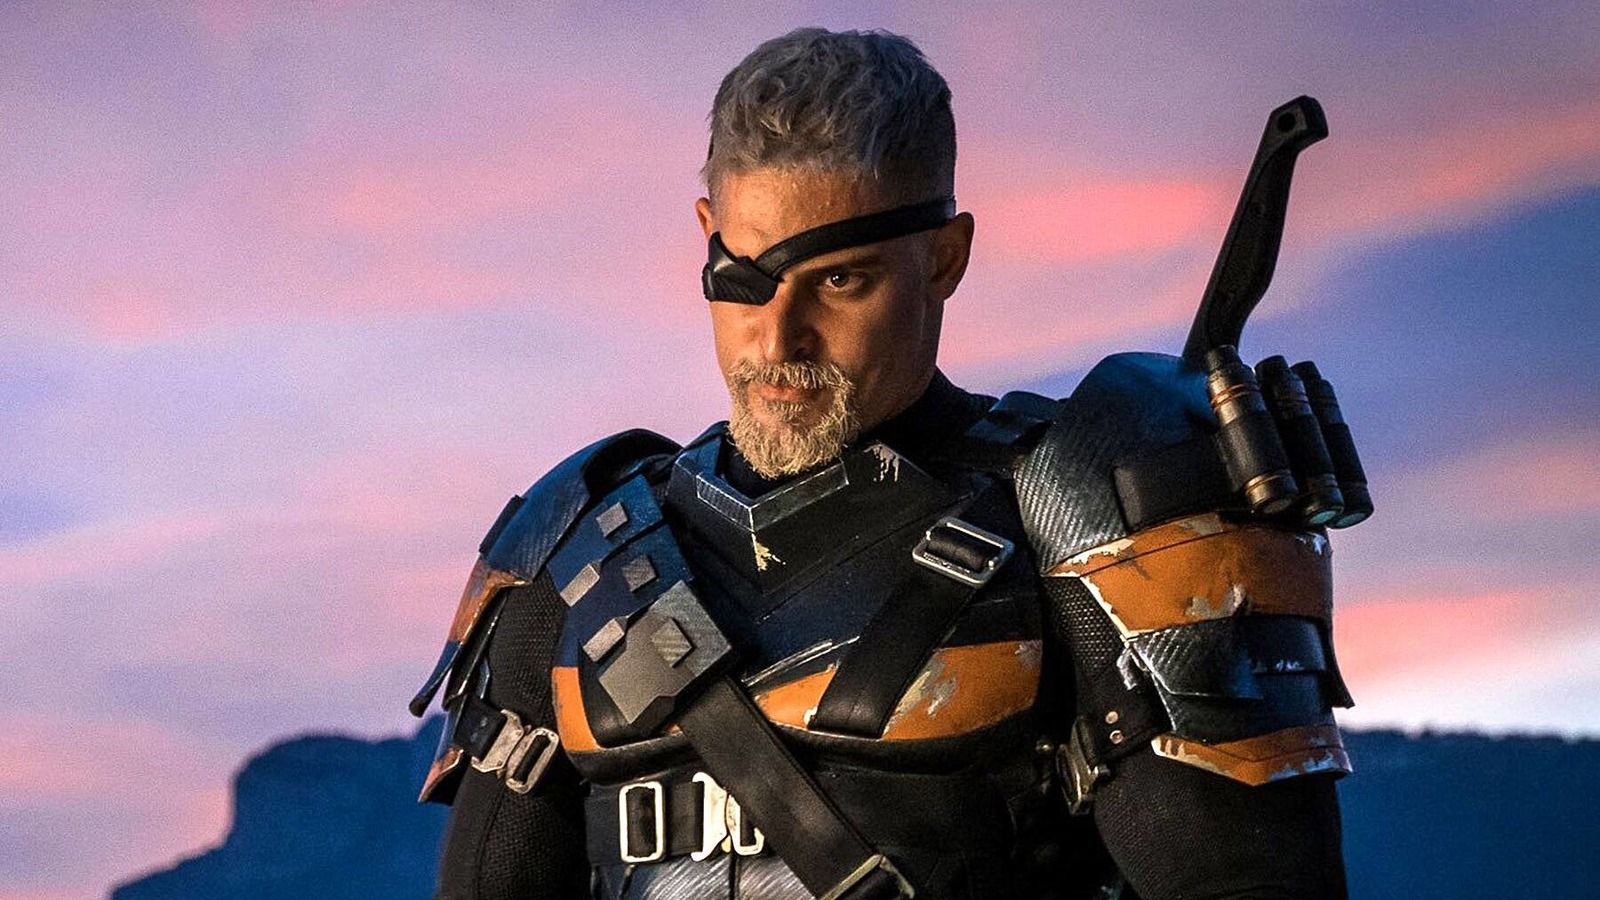 New Look At Joe Manganiello's Deathstroke In The Snyder Cut Will Blow You Away